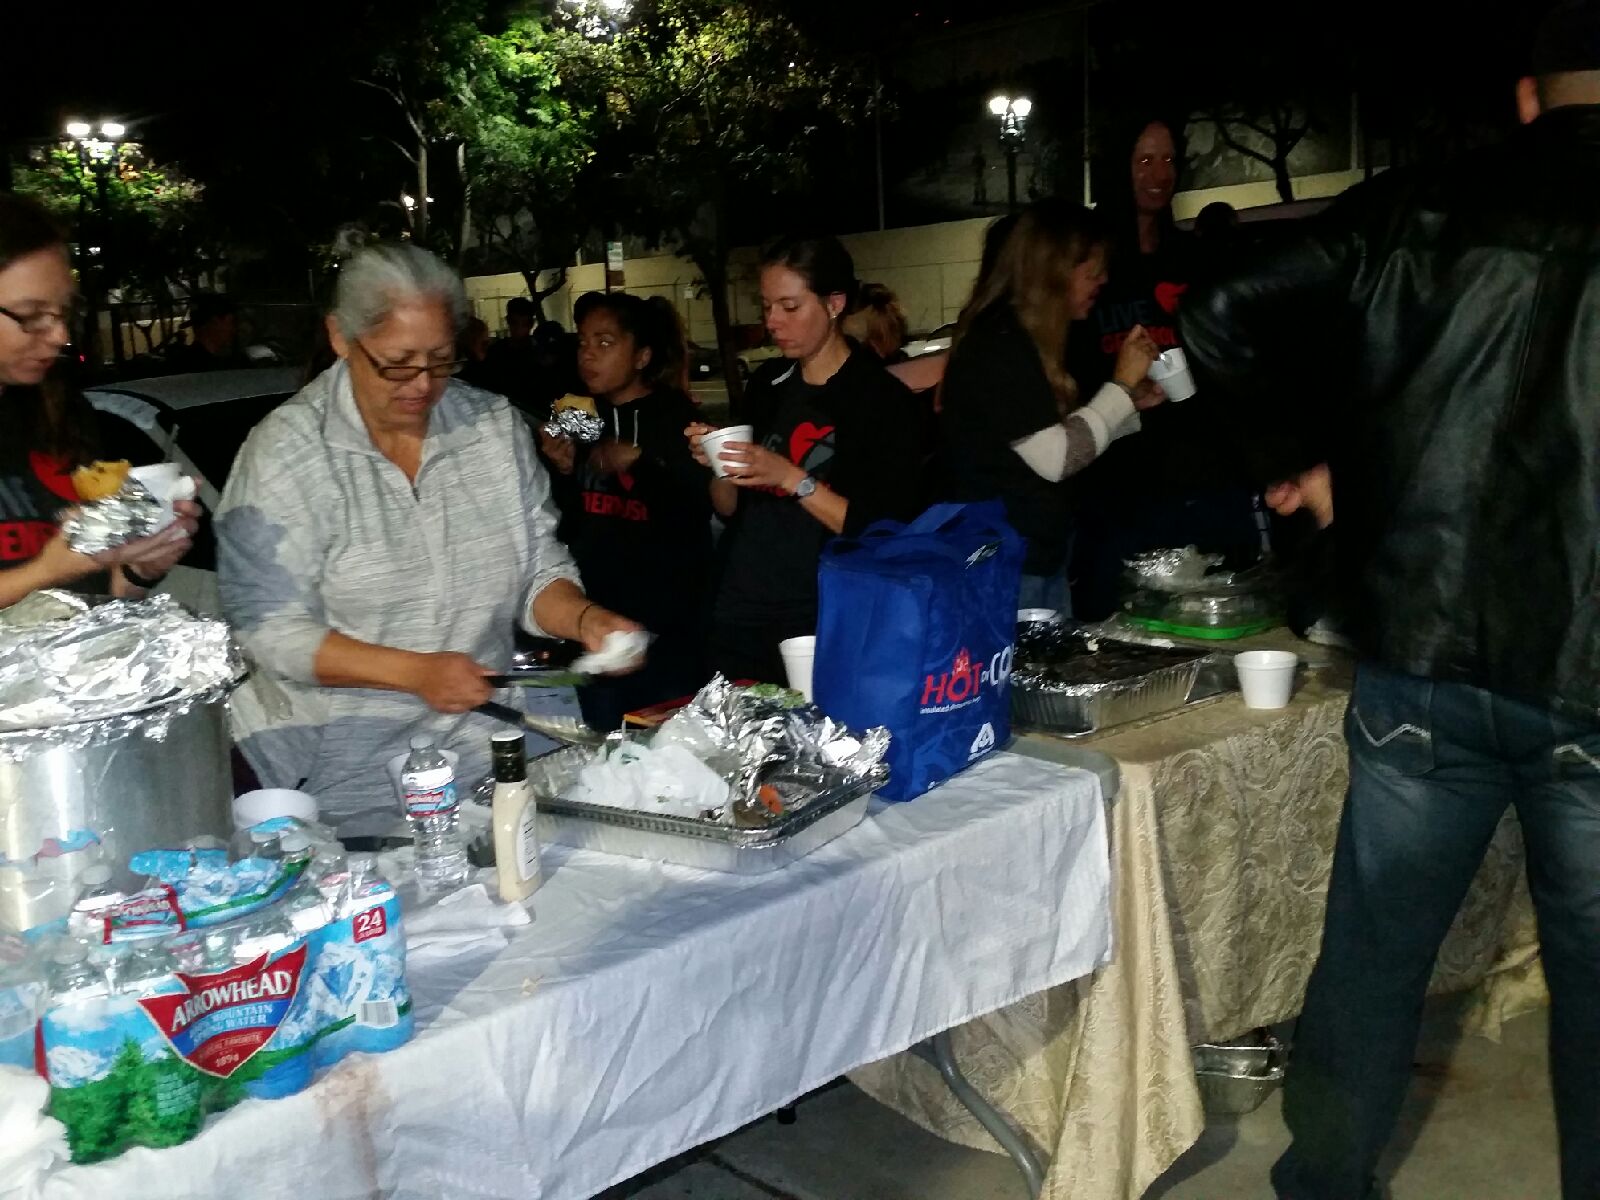 Feed the Homeless On Thanksgiving in Downtown San Diego – Streets of Hope